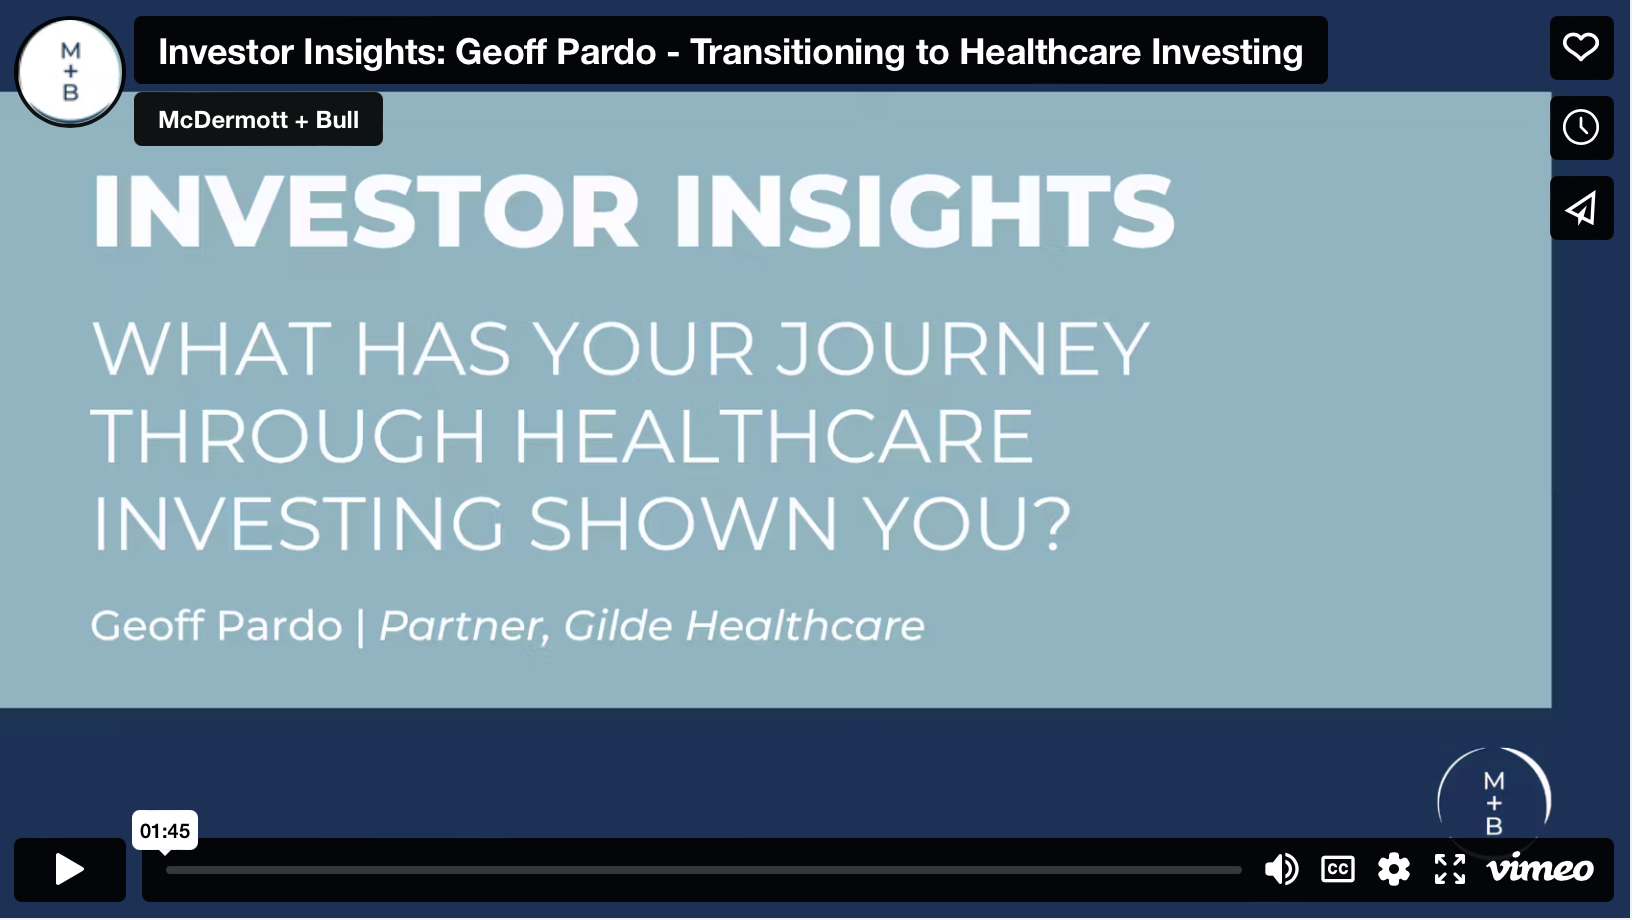 Investor Insights: Geoff Pardo - Transitioning to Healthcare Investing